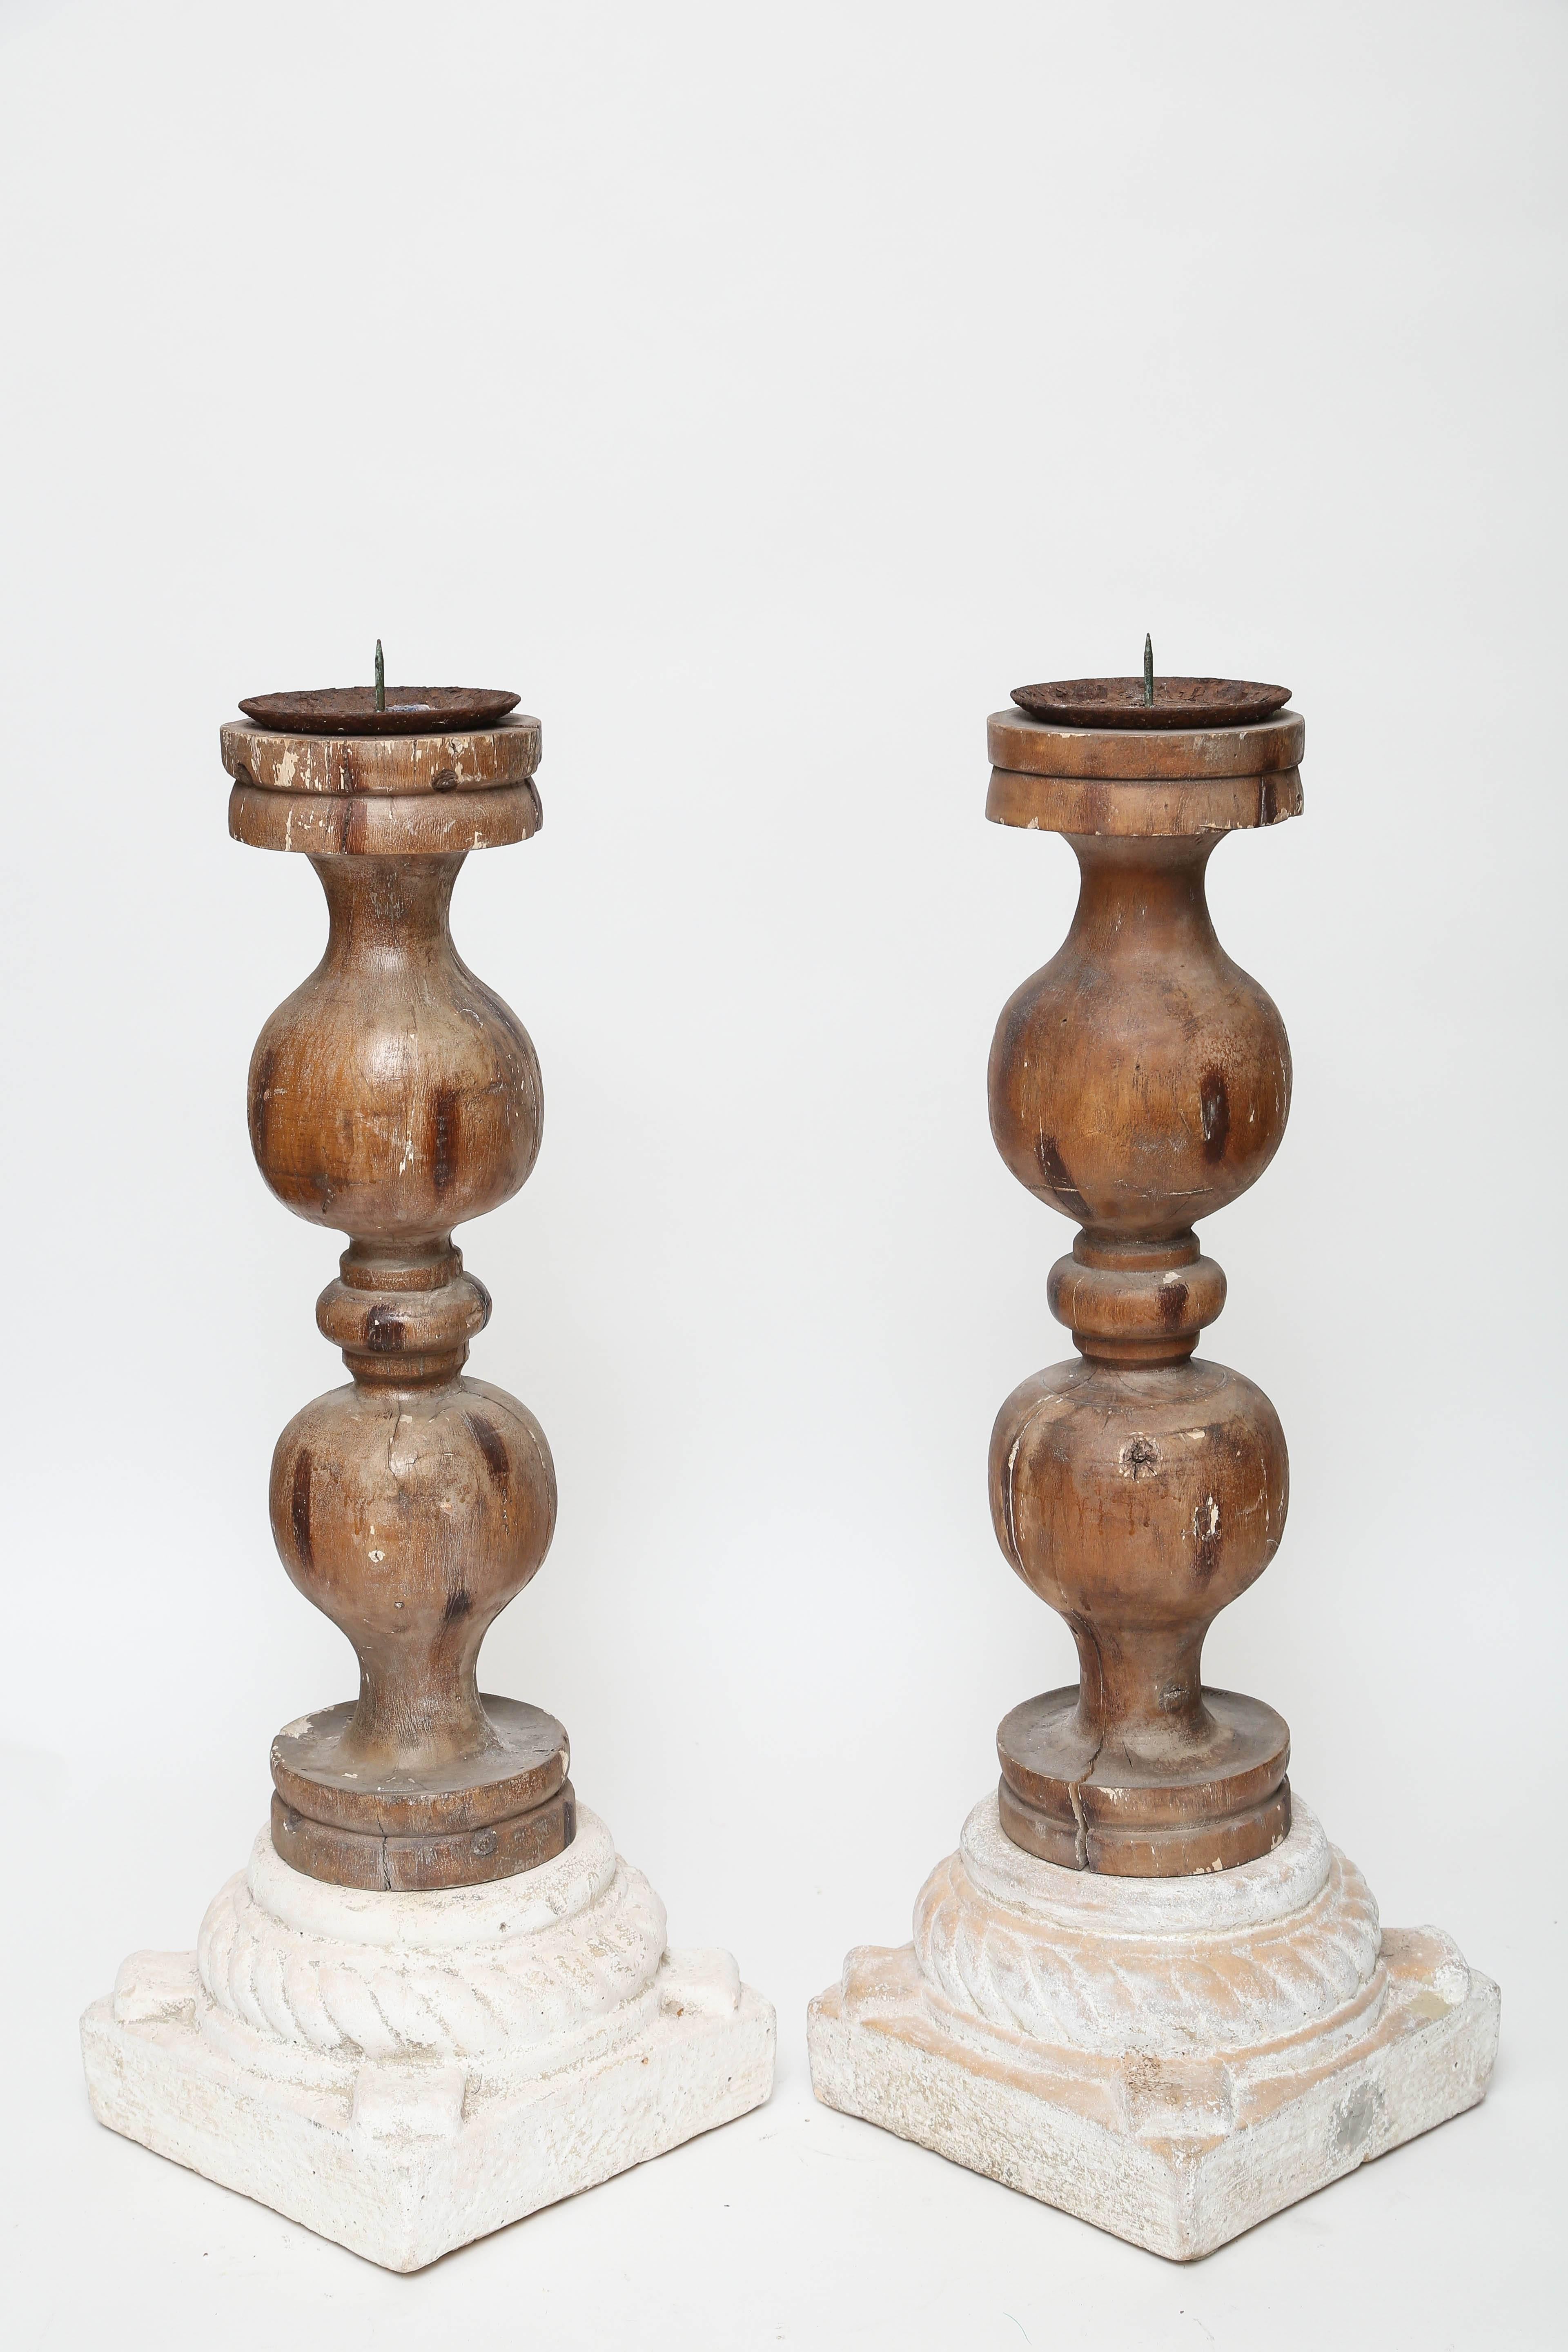 Pair of Architectural Wood and Stone Candlesticks In Good Condition For Sale In West Palm Beach, FL